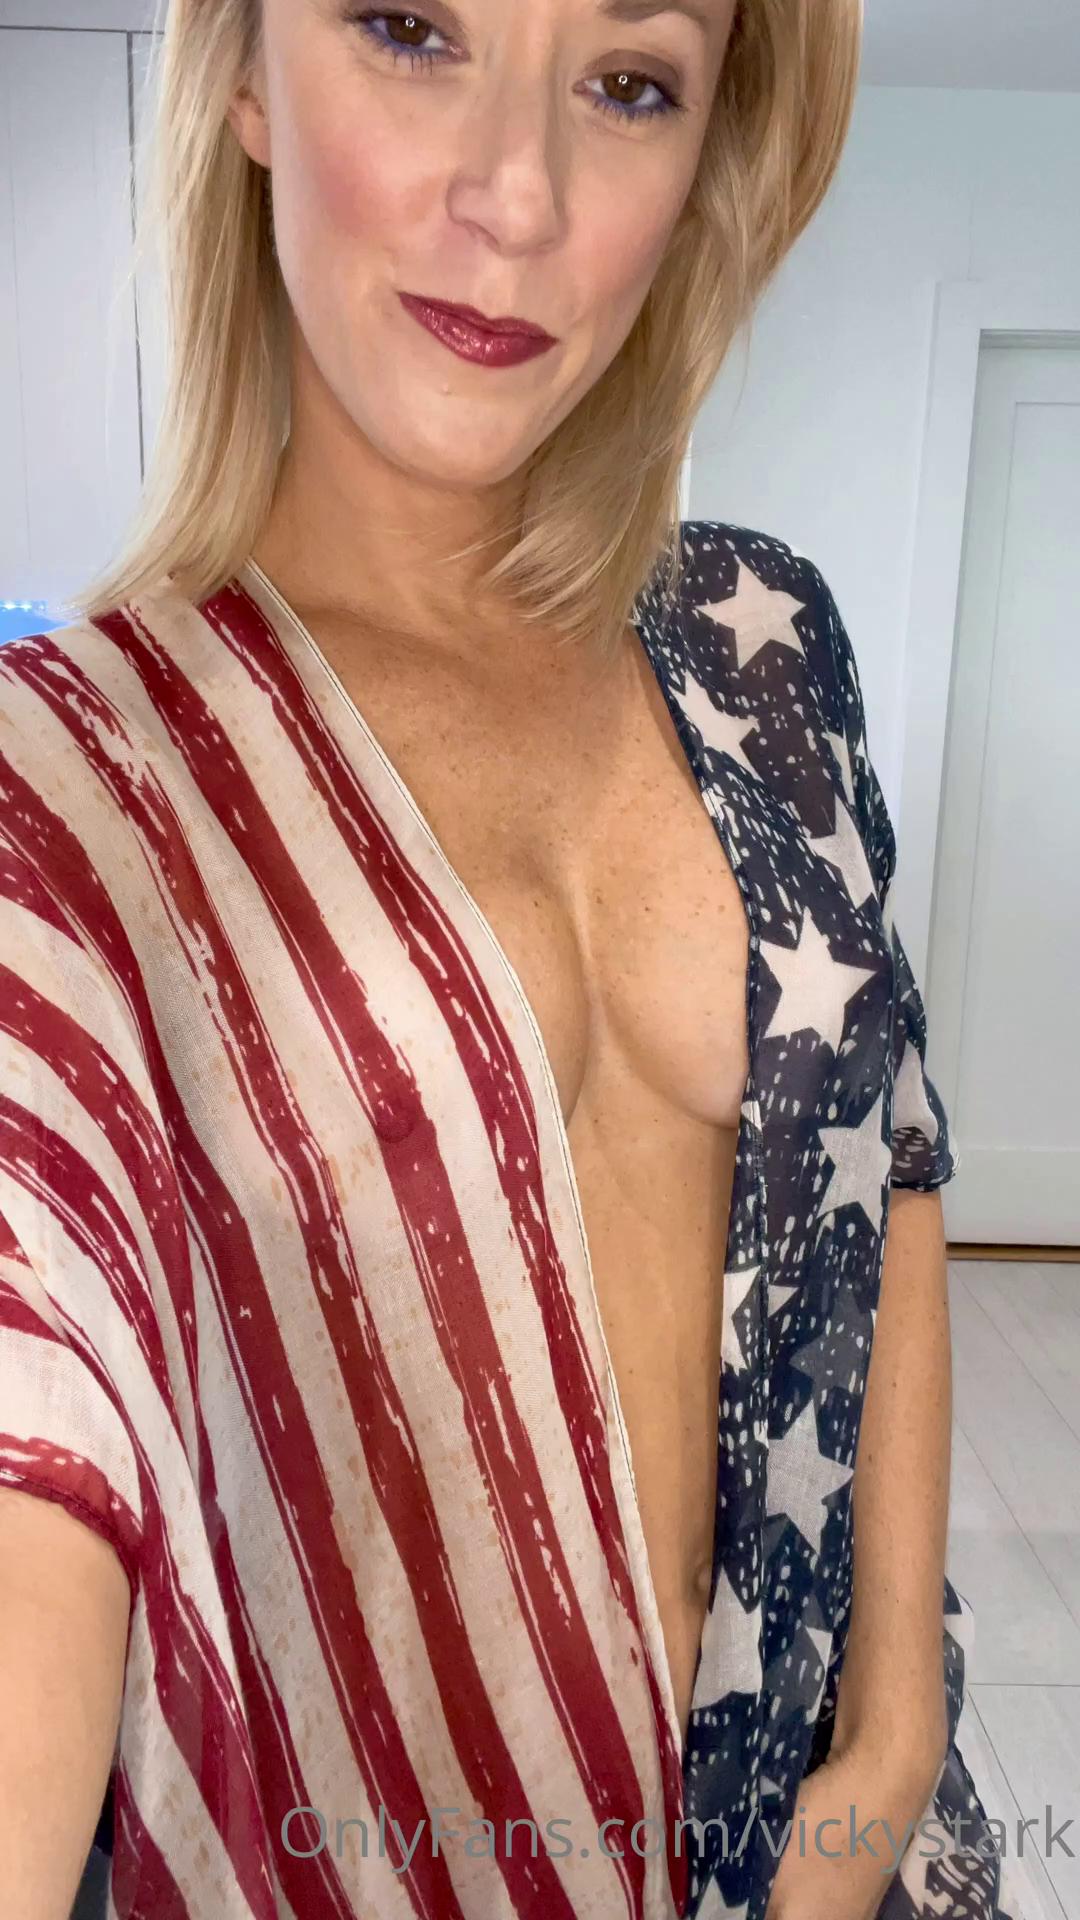 Vicky Stark Nude Election Day Try On Onlyfans Video Leaked - Famous  Internet Girls